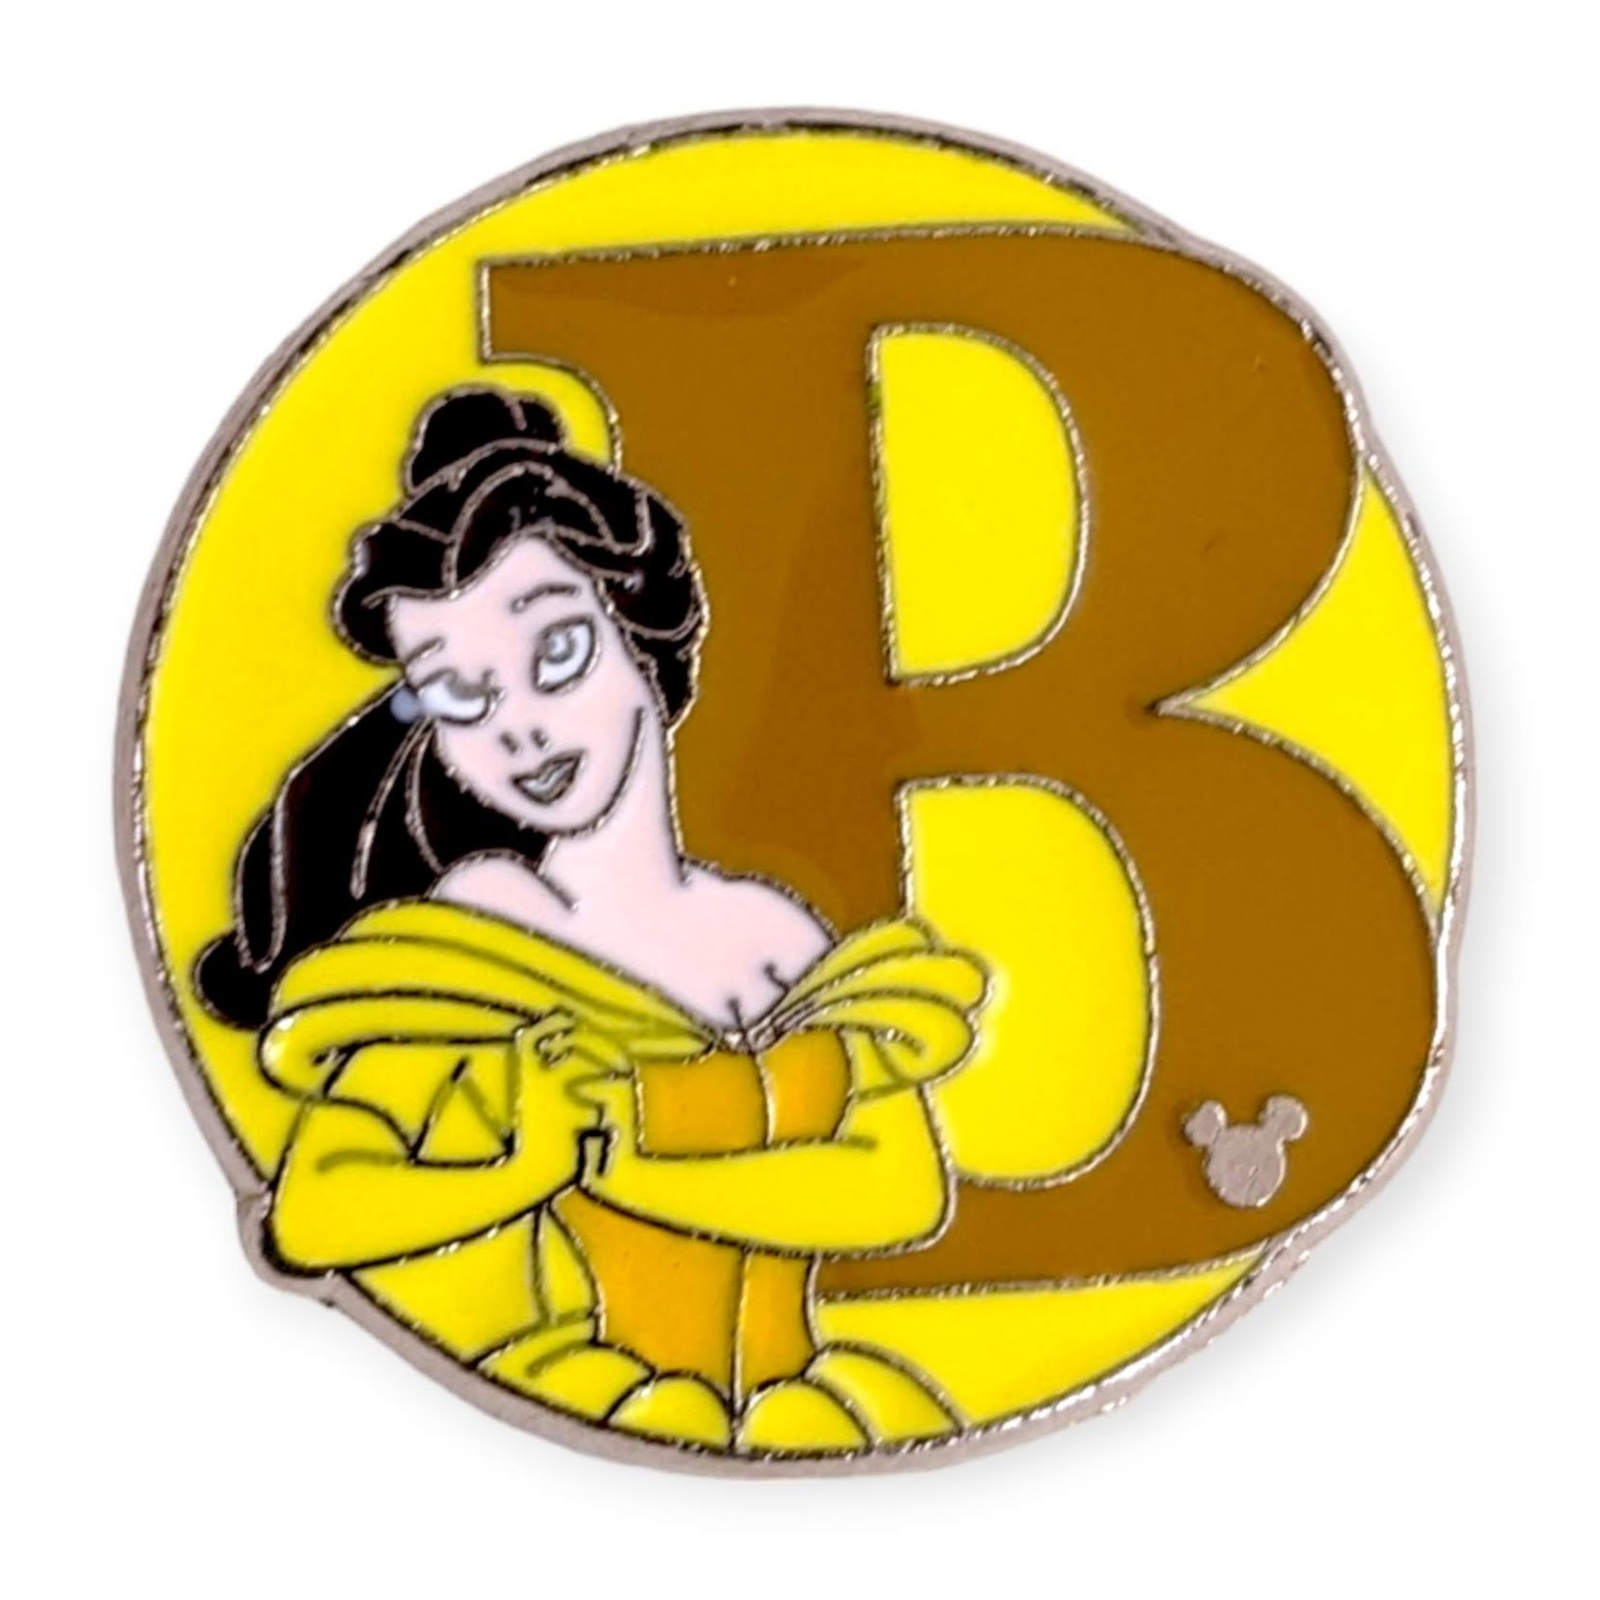 Primary image for Beauty and the Beast Disney Pin: Belle B Monogram, Alphabet Letter